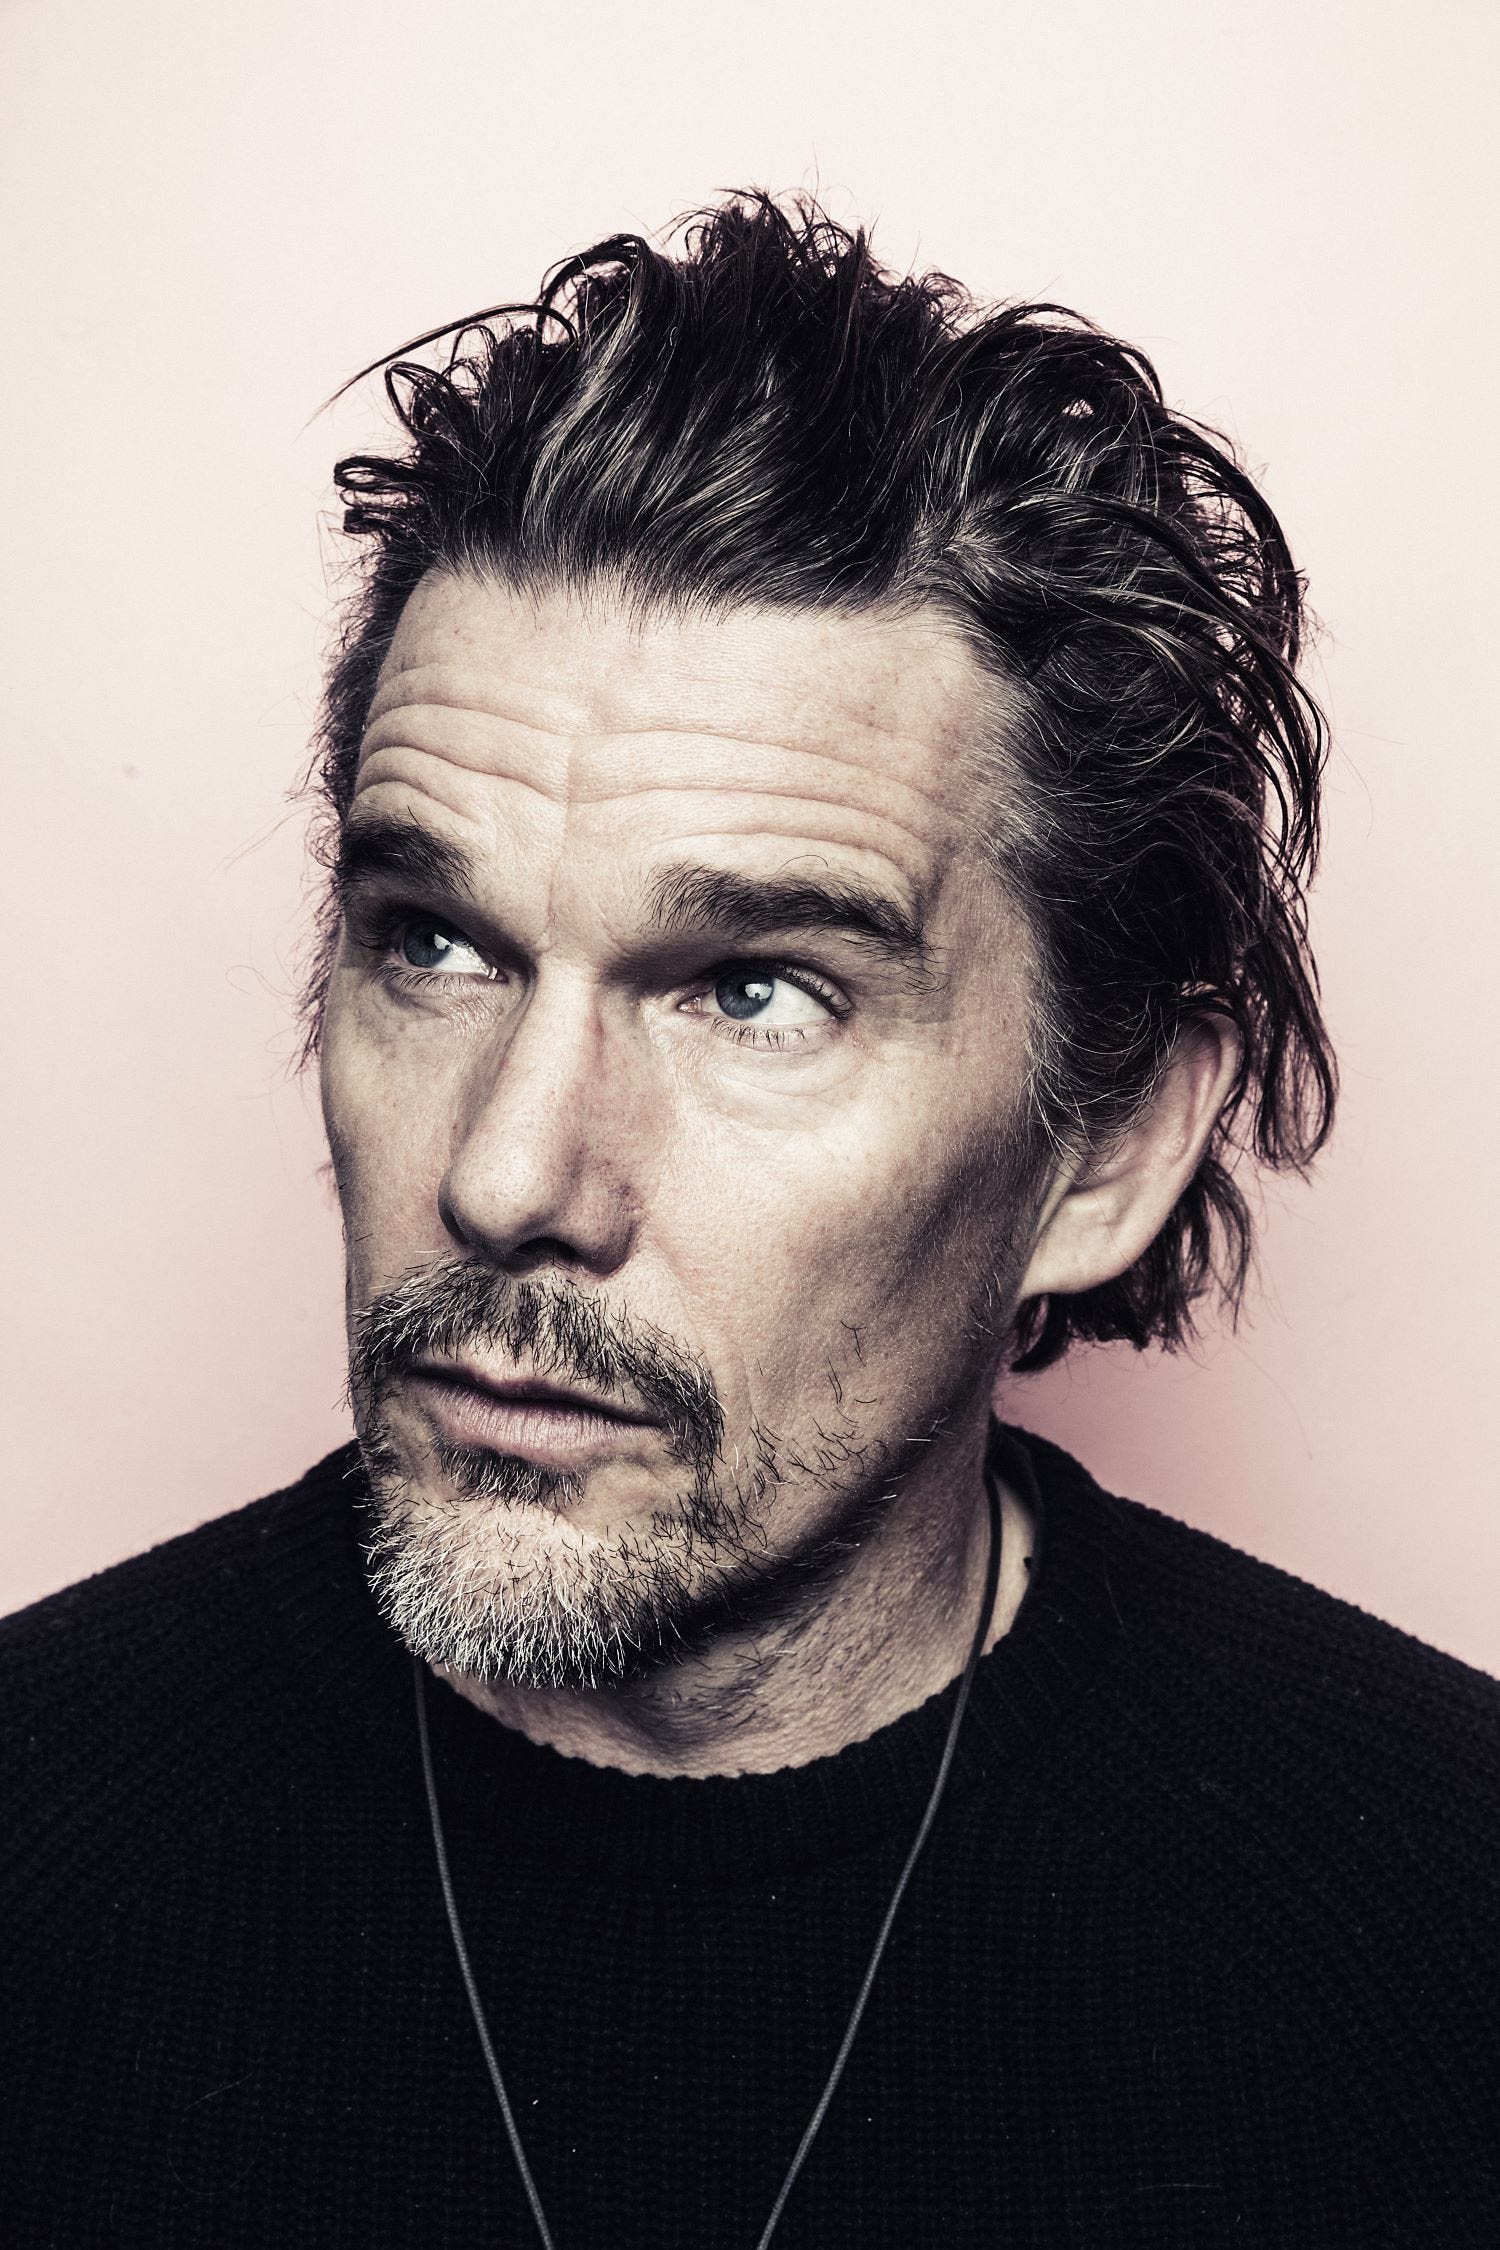 'Wildcat' director Ethan Hawke discusses the challenges, contradictions of Flannery O'Connor